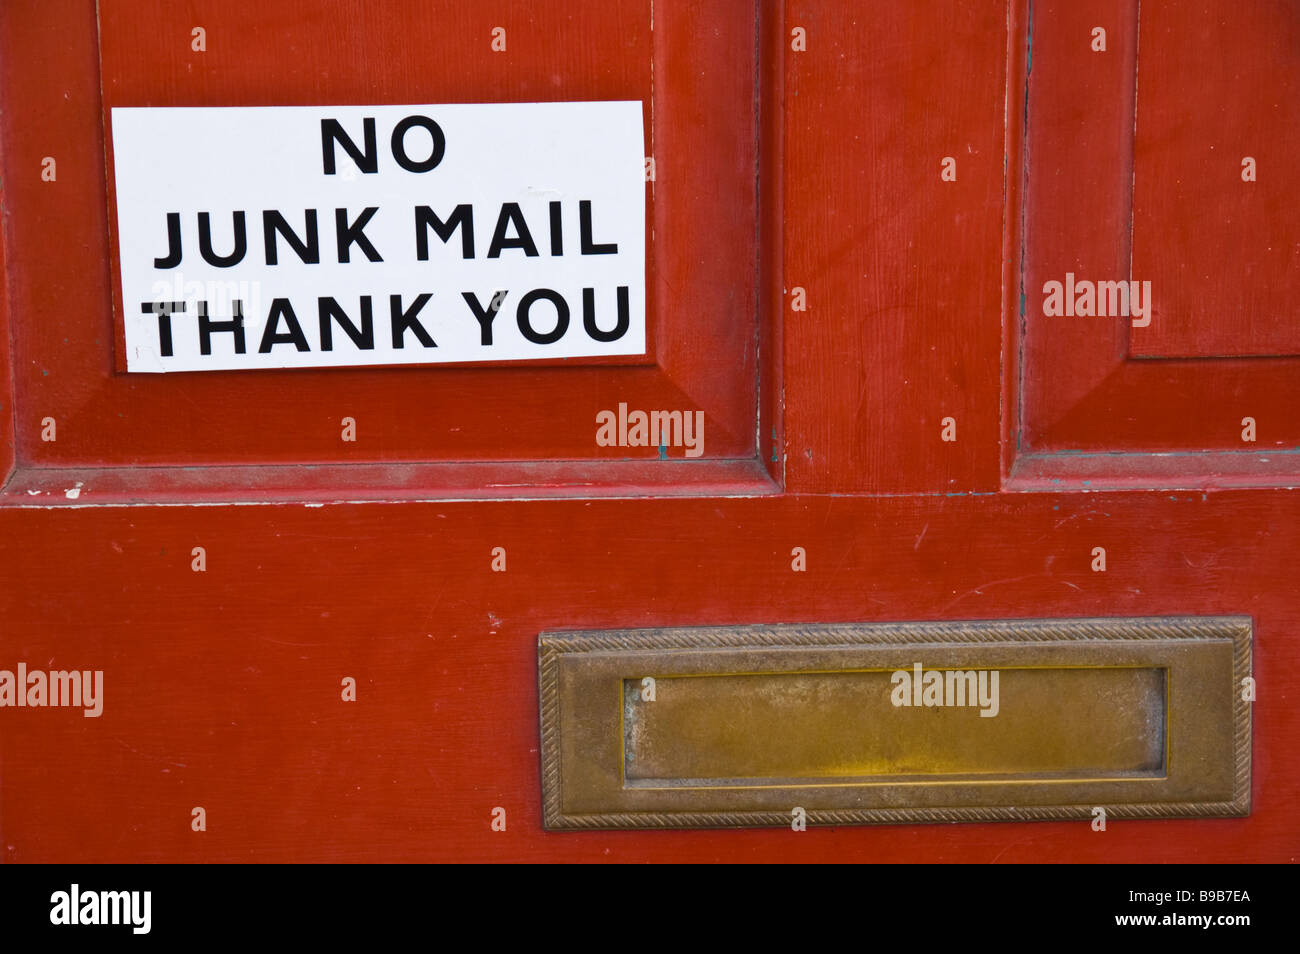 Vinyl Sticker Stop Unwanted Junk Mail On The Doormat With A No Junk Mail Sign 